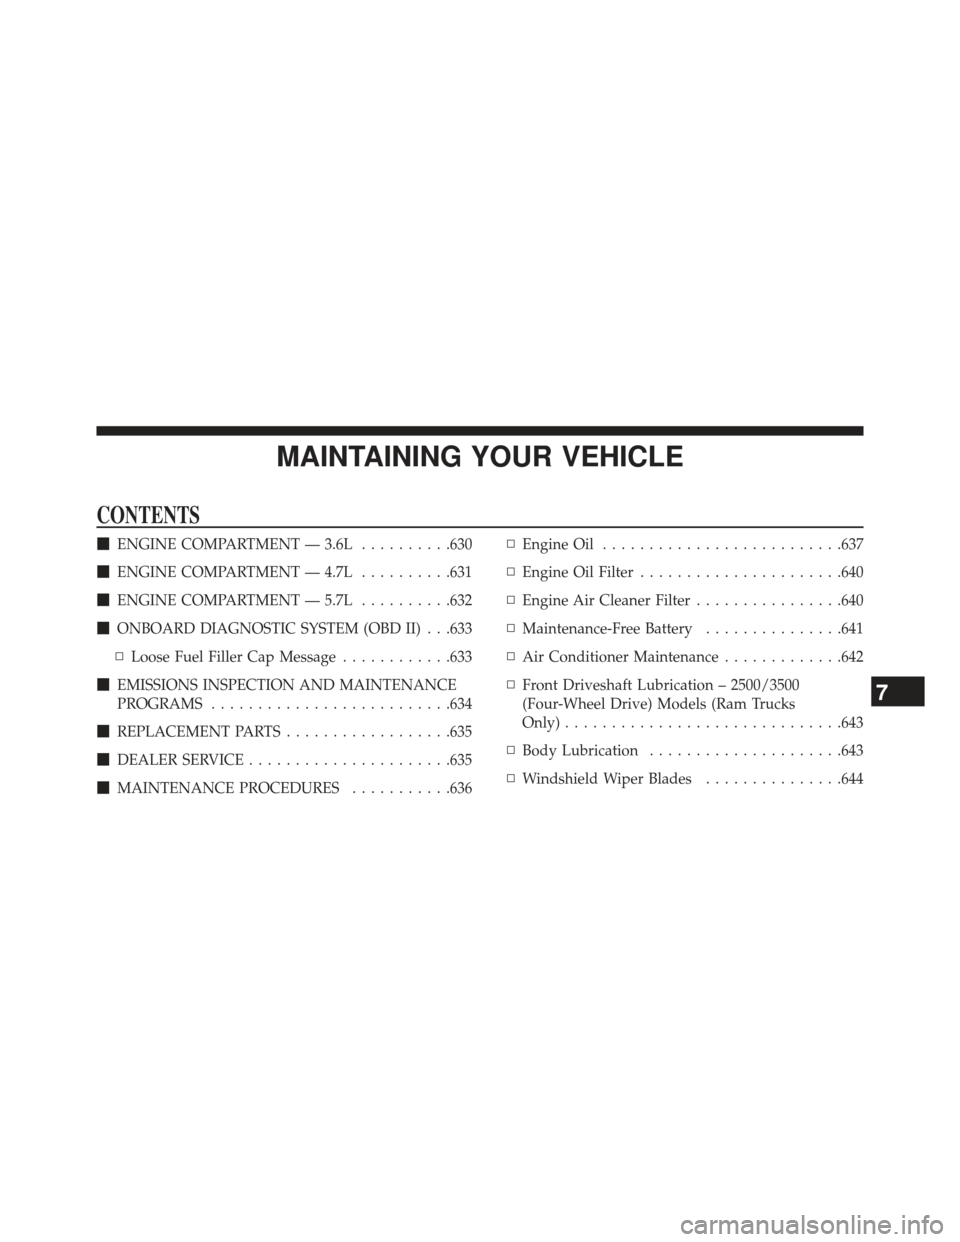 Ram 1500 2013 User Guide MAINTAINING YOUR VEHICLE
CONTENTS
ENGINE COMPARTMENT — 3.6L ..........630
 ENGINE COMPARTMENT — 4.7L ..........631
 ENGINE COMPARTMENT — 5.7L ..........632
 ONBOARD DIAGNOSTIC SYSTEM (OBD II